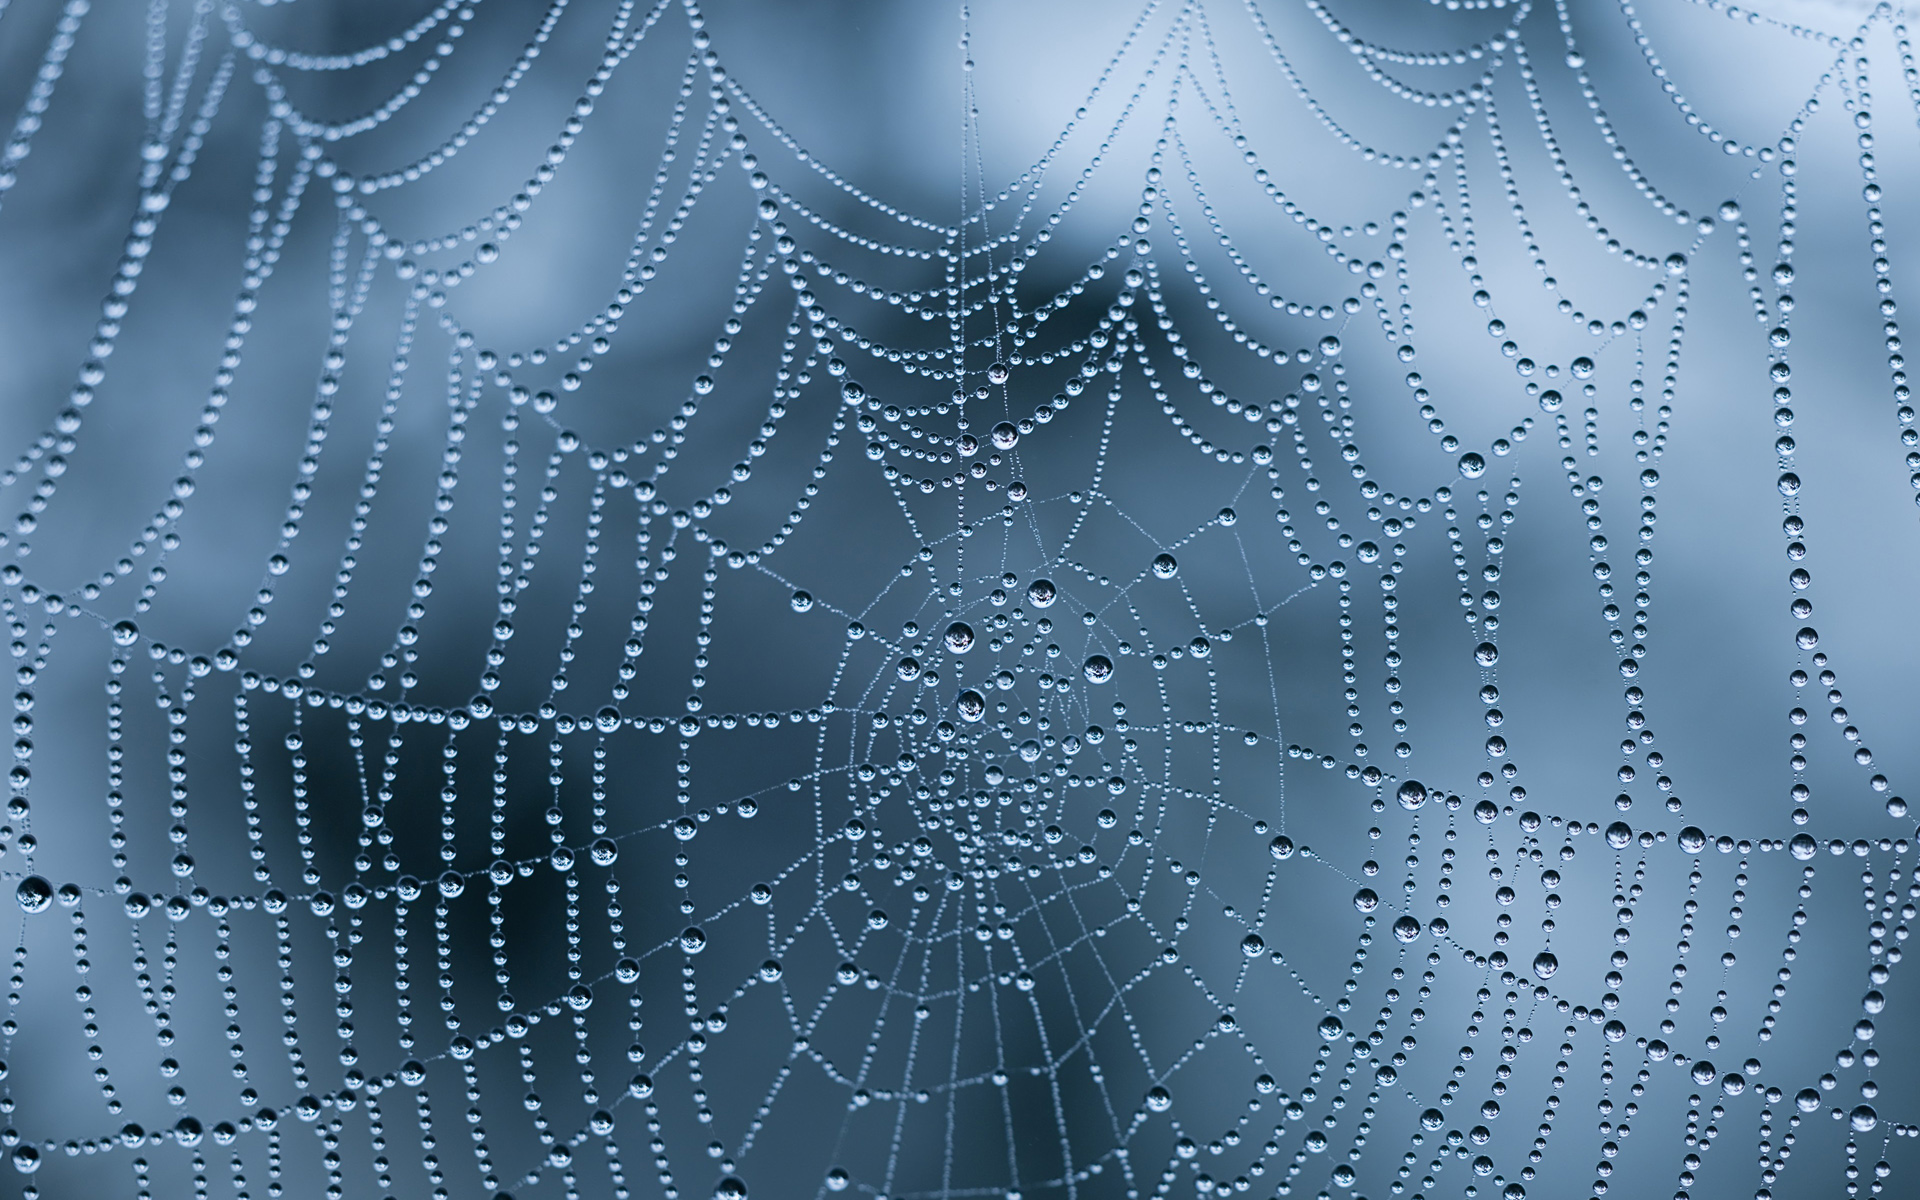 Incredible Spiderweb Wallpaper With Water Drops And